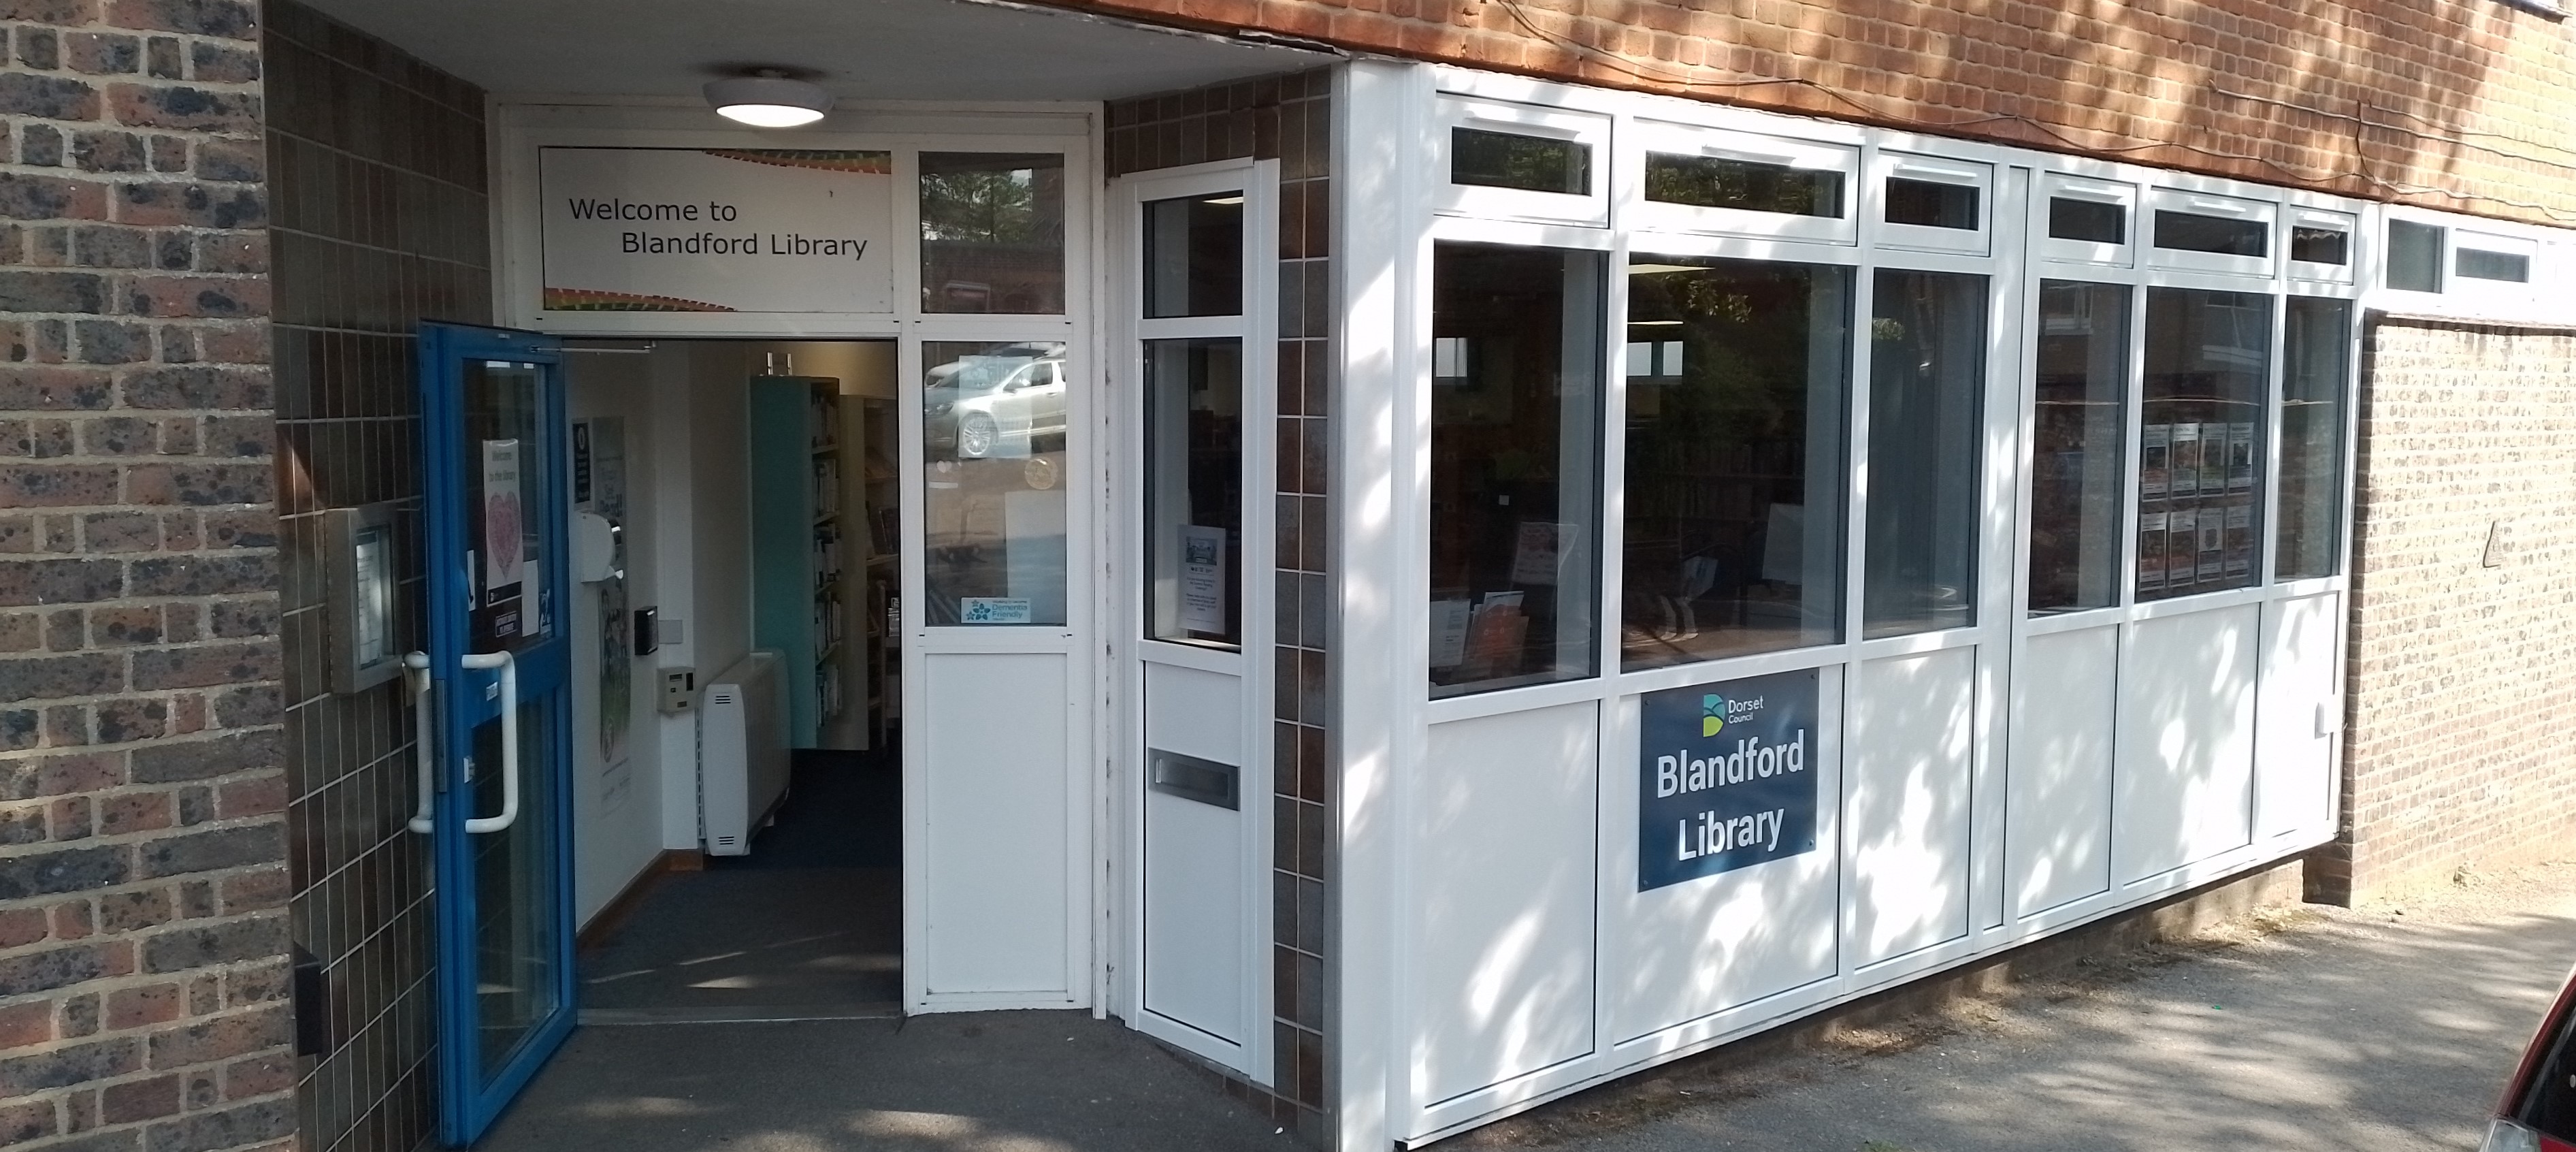 This is a picture of the entrance to Blandford Library.  The main door is open.